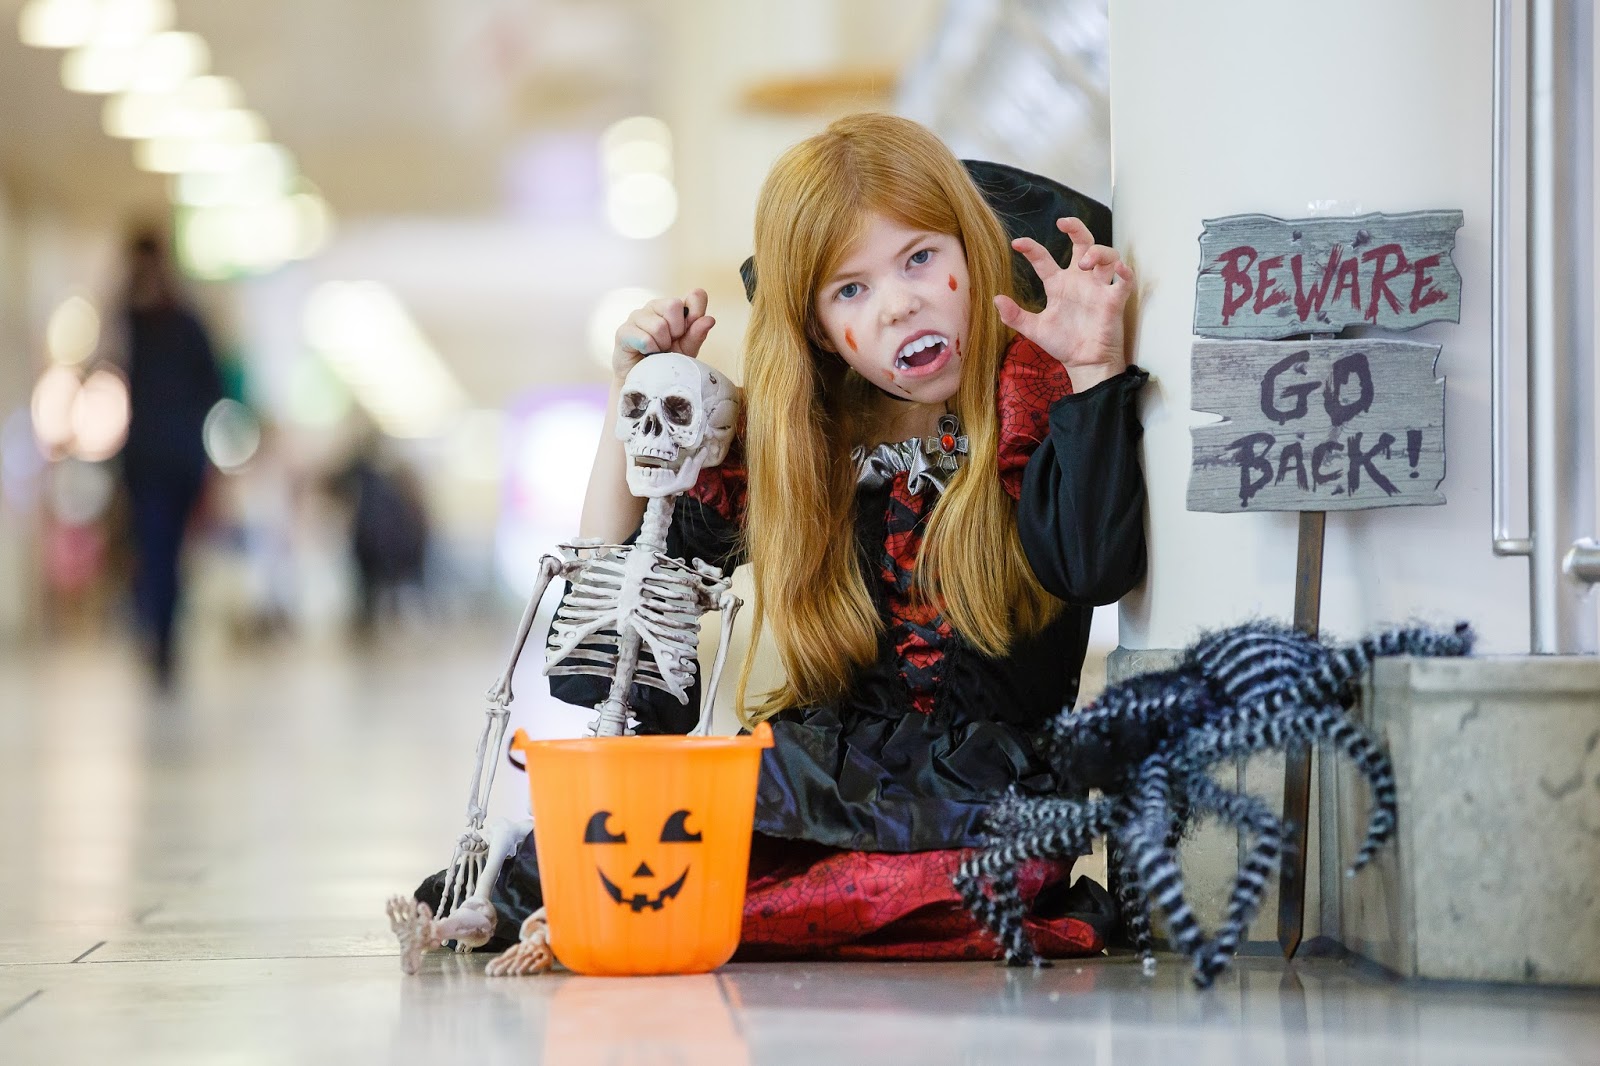 A guide to FREE Halloween crafts and events at intu Eldon Square Newcastle and intu Metrocentre Gateshead this October Half Term